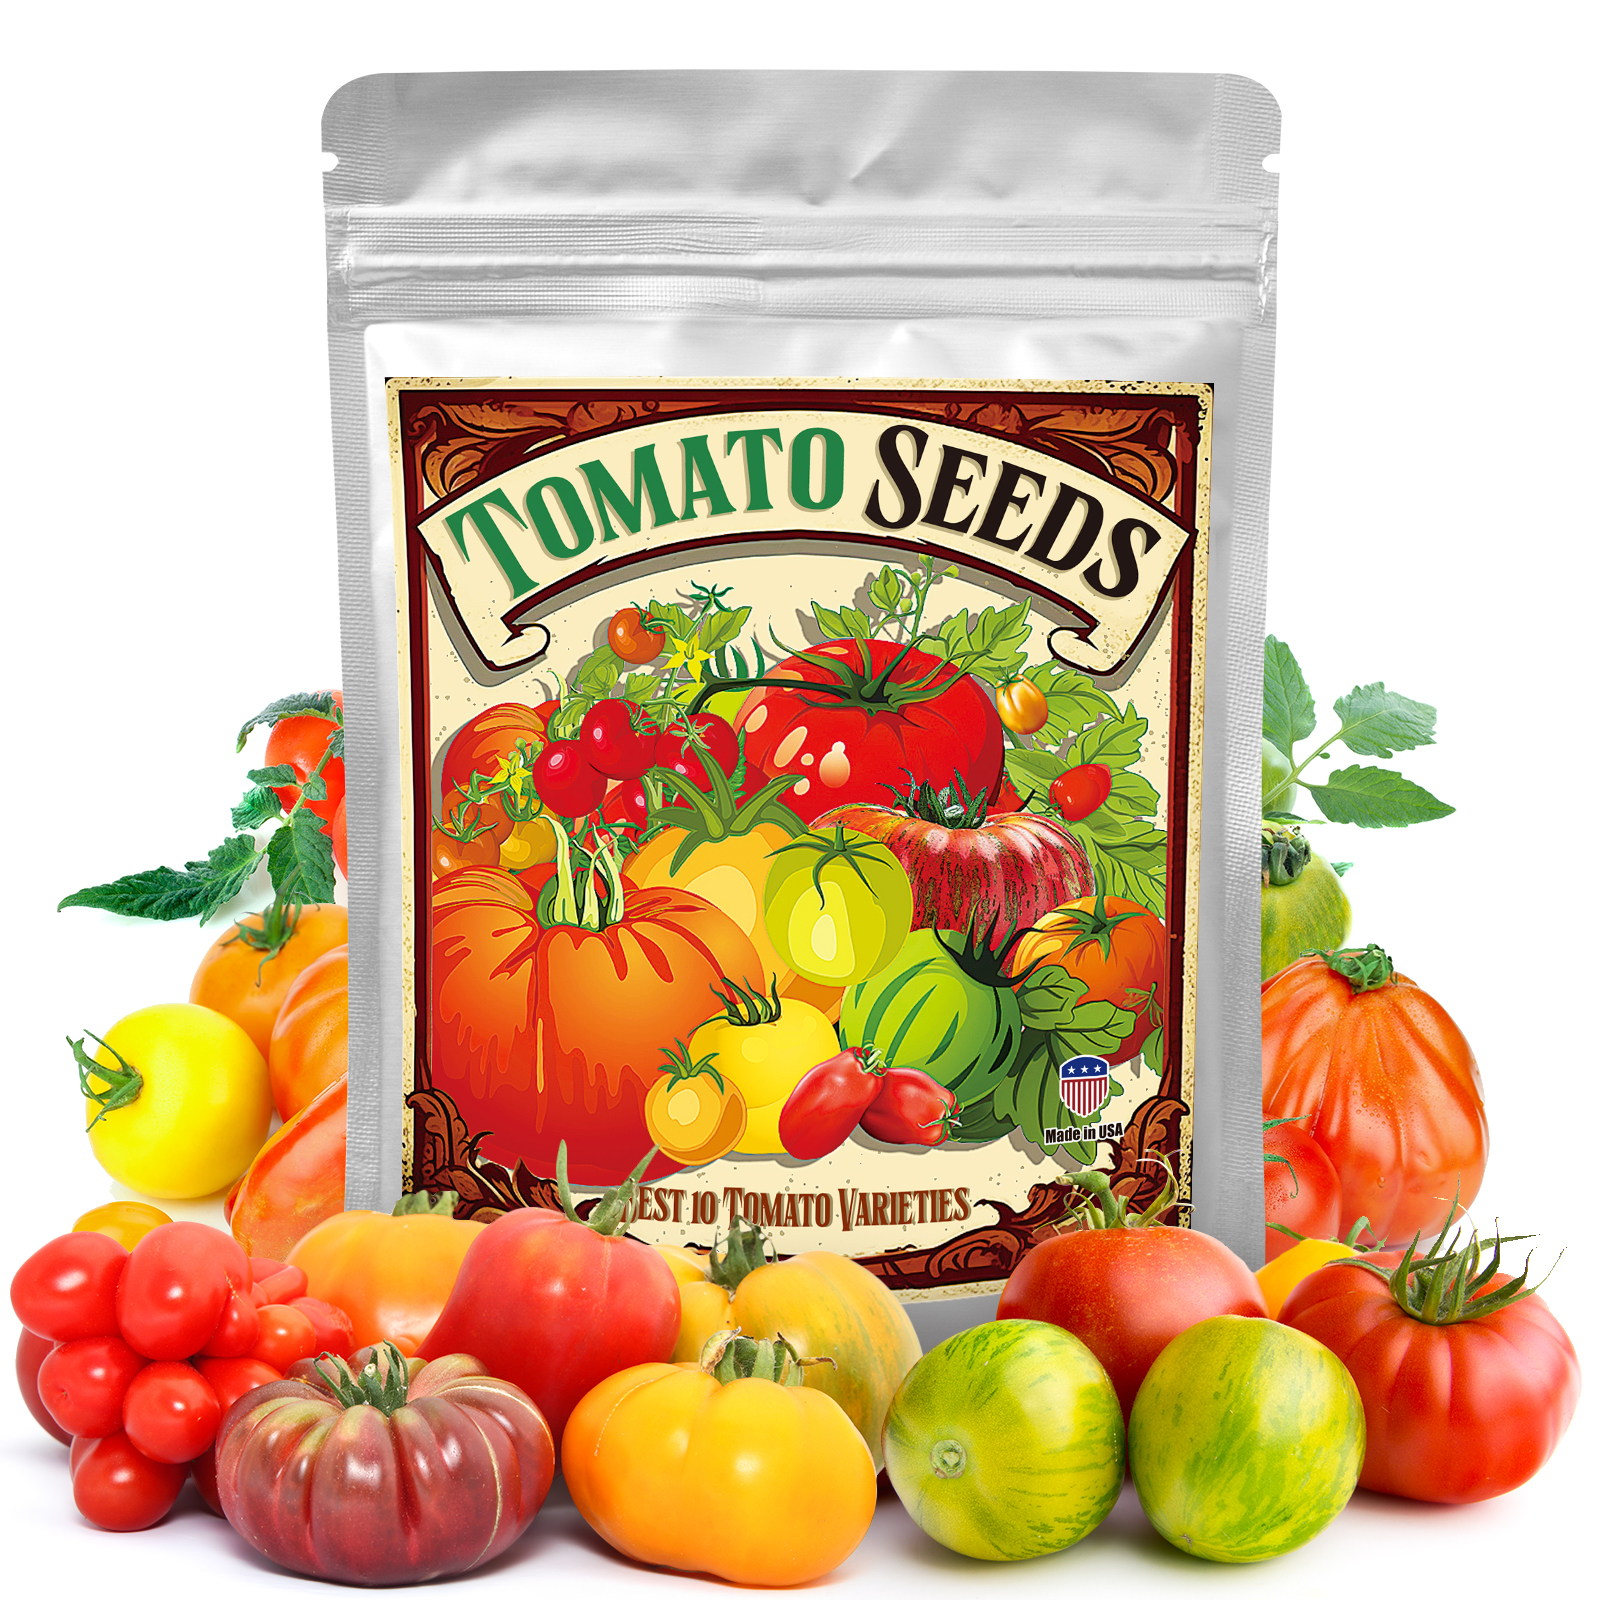 

1,500 Tomato Seeds, Heirloom Vegetable Seed For Planting Indoor Outdoor, 10 Varieties Sweet Salad Tomato Seeds Gift Pack - Roma Vf, Marmande, , Rainbow Mix And More